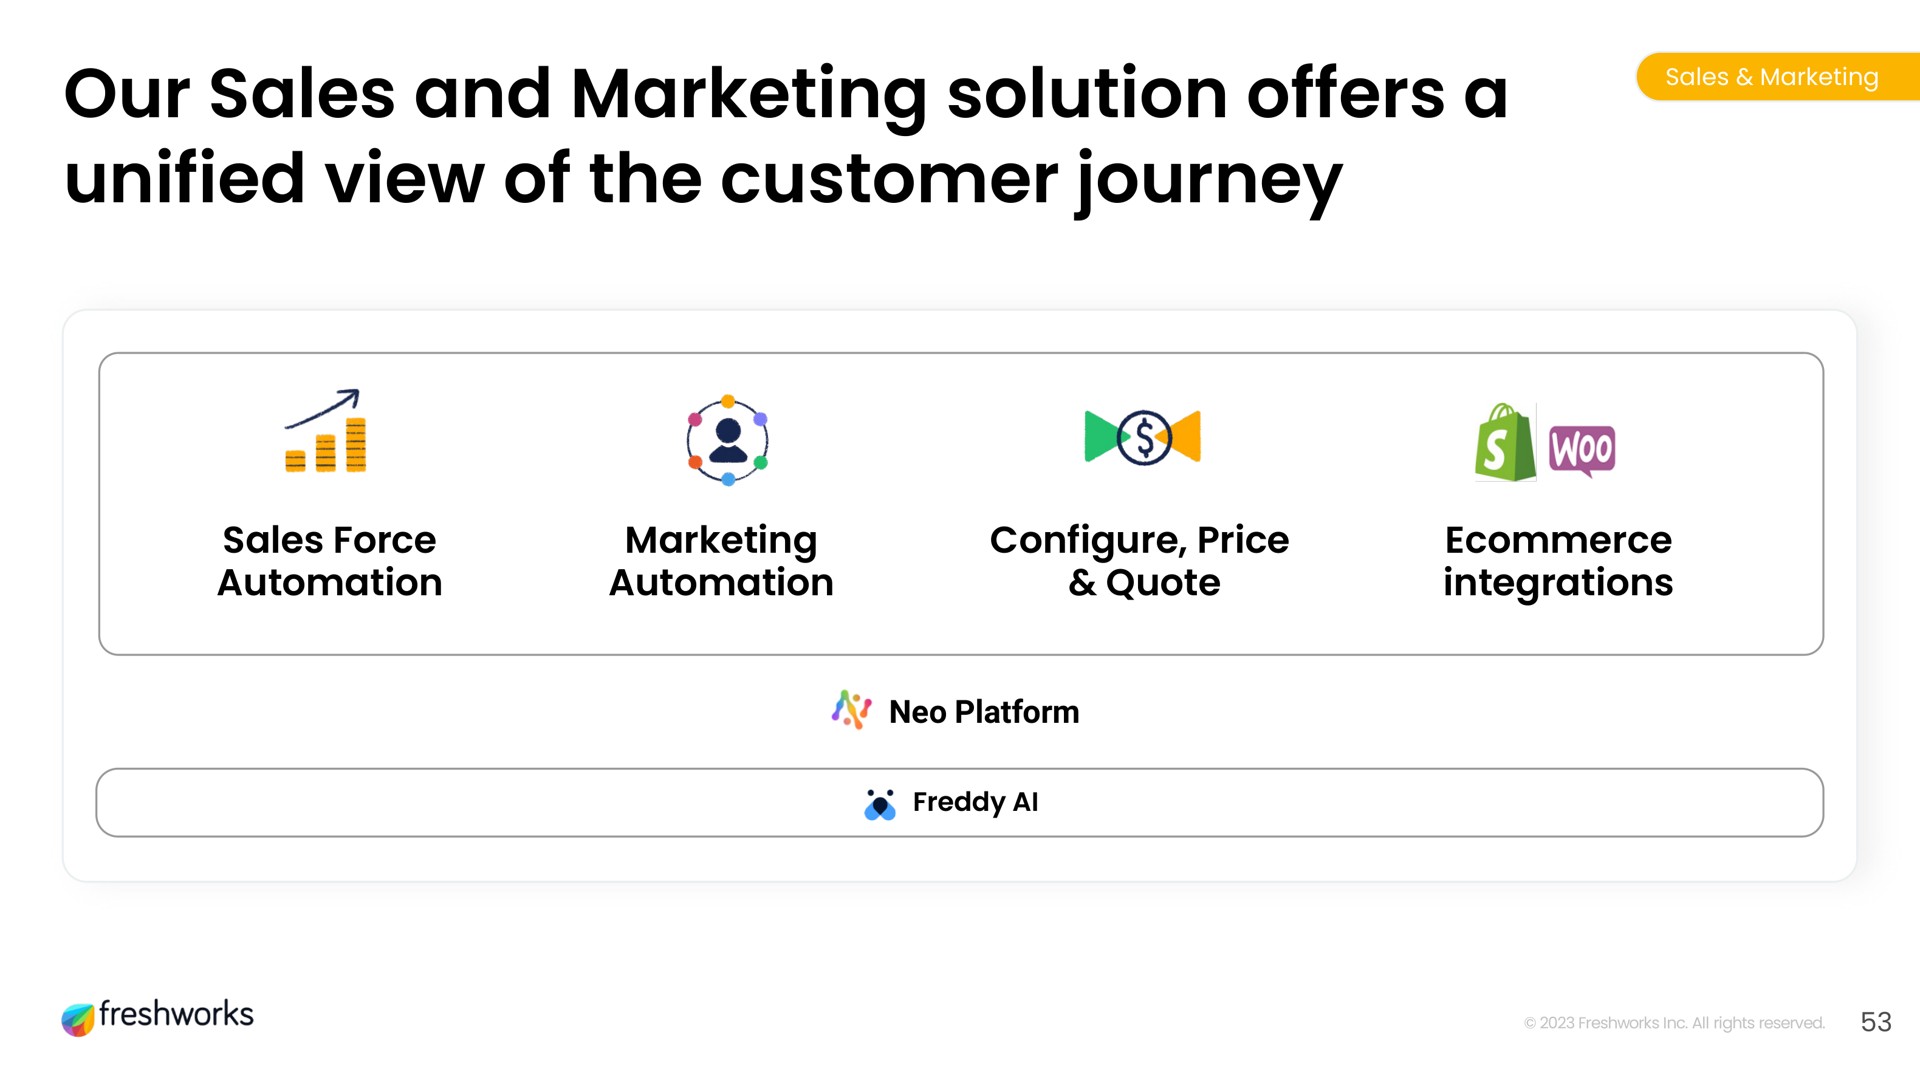 our sales and marketing solution offers a unified view of the customer journey | Freshworks